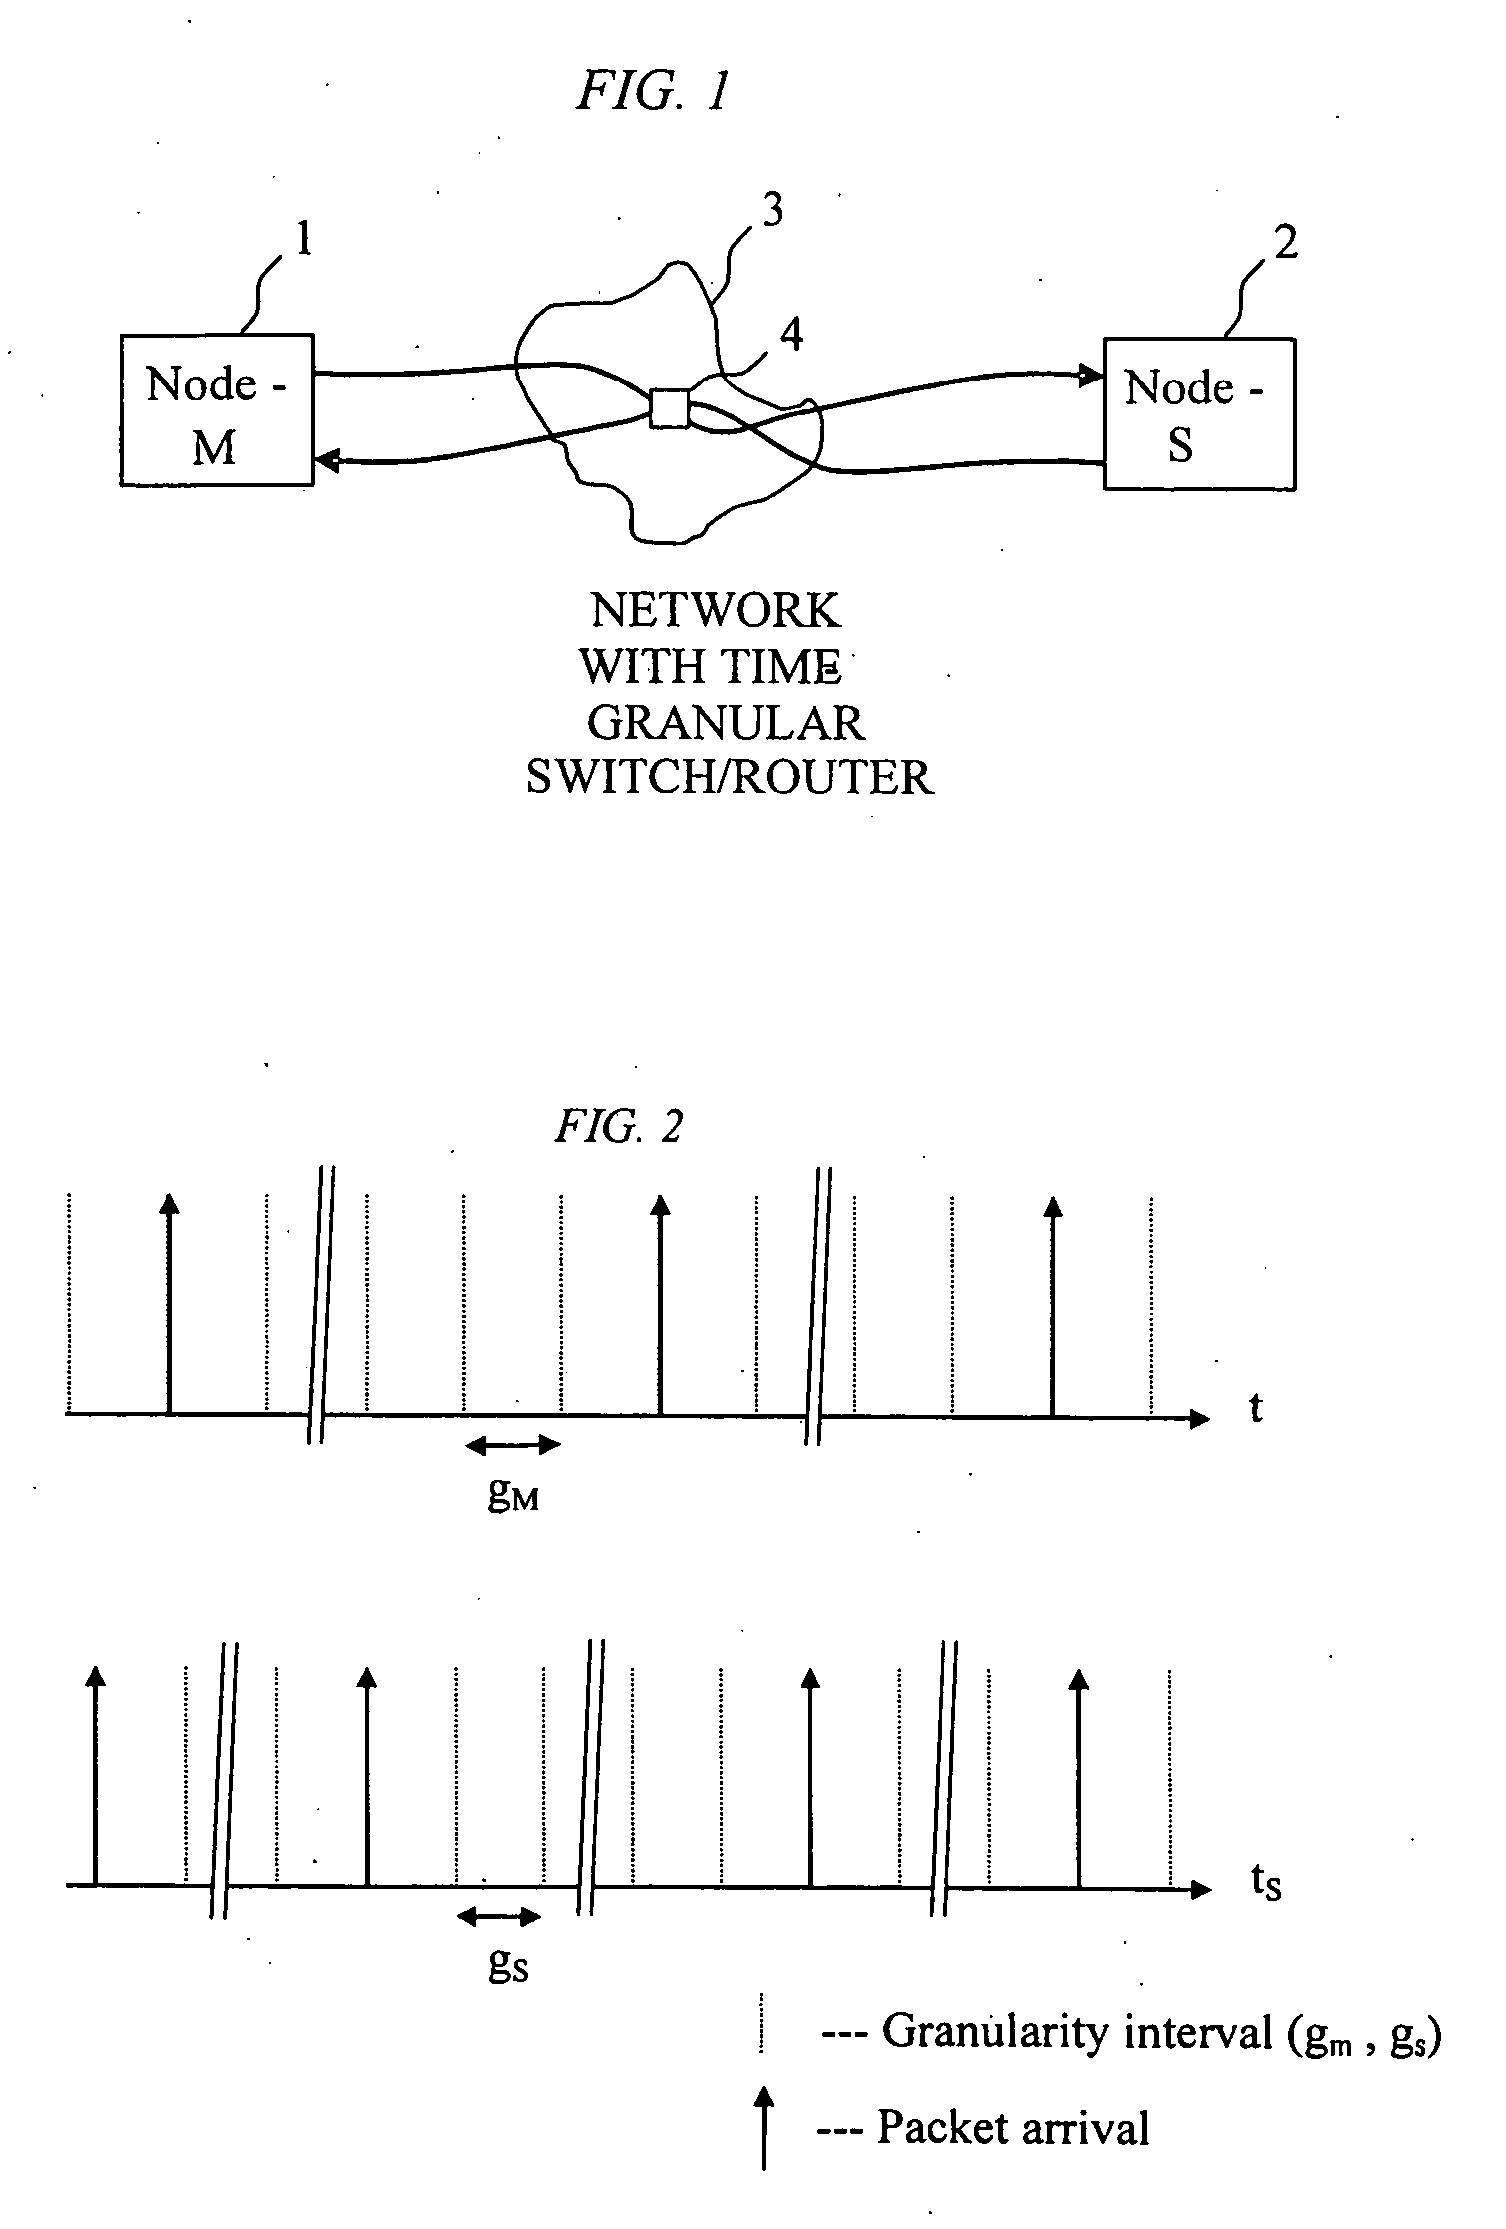 Method of recovering timing over a granular packet network